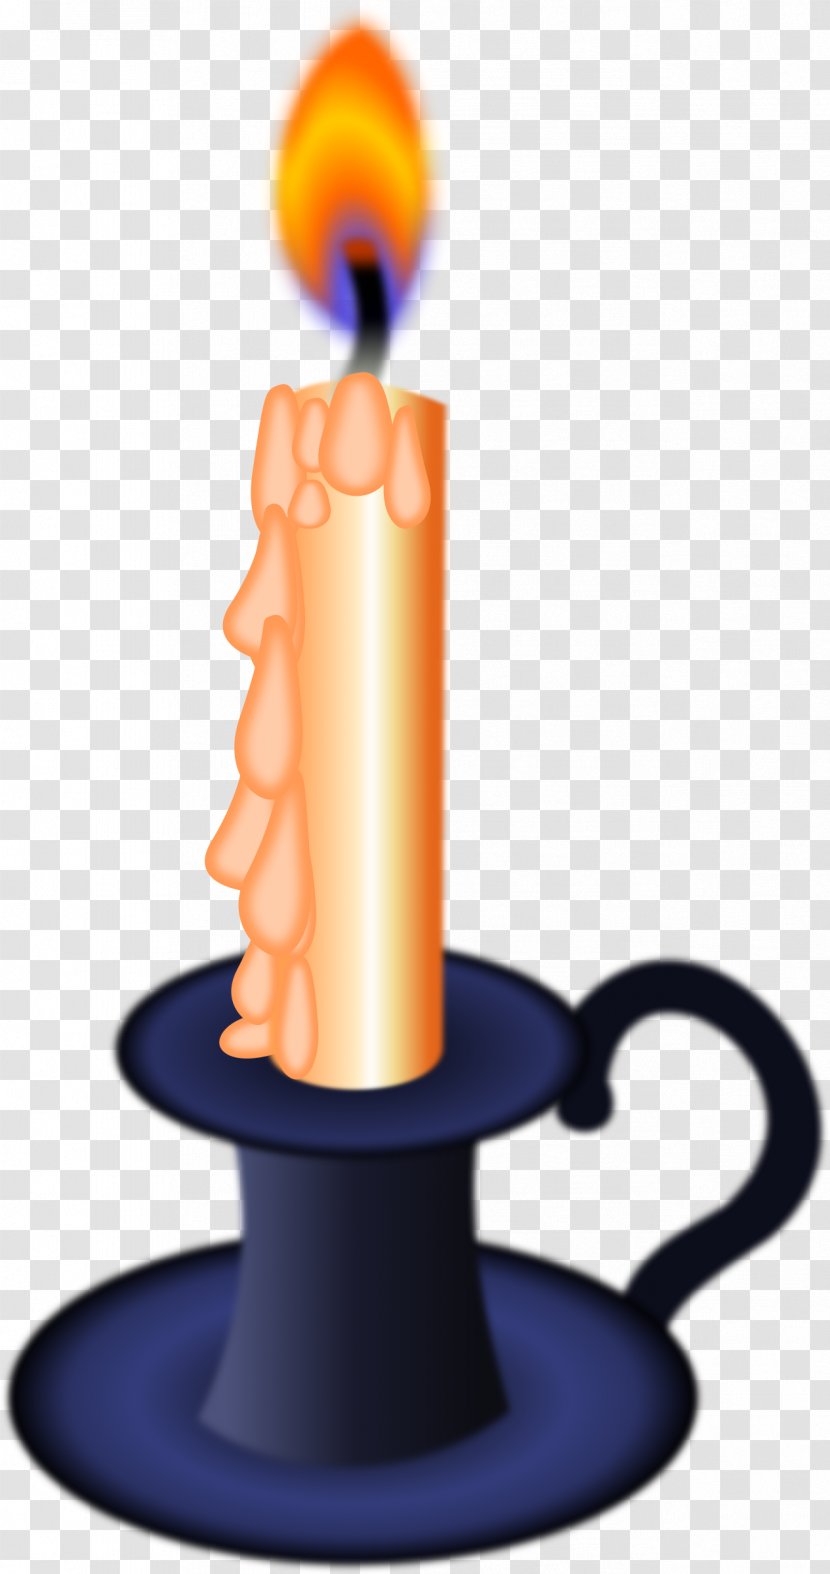 Birthday Cake Paschal Candle Clip Art - Website - Halloween Candles Cliparts Transparent PNG